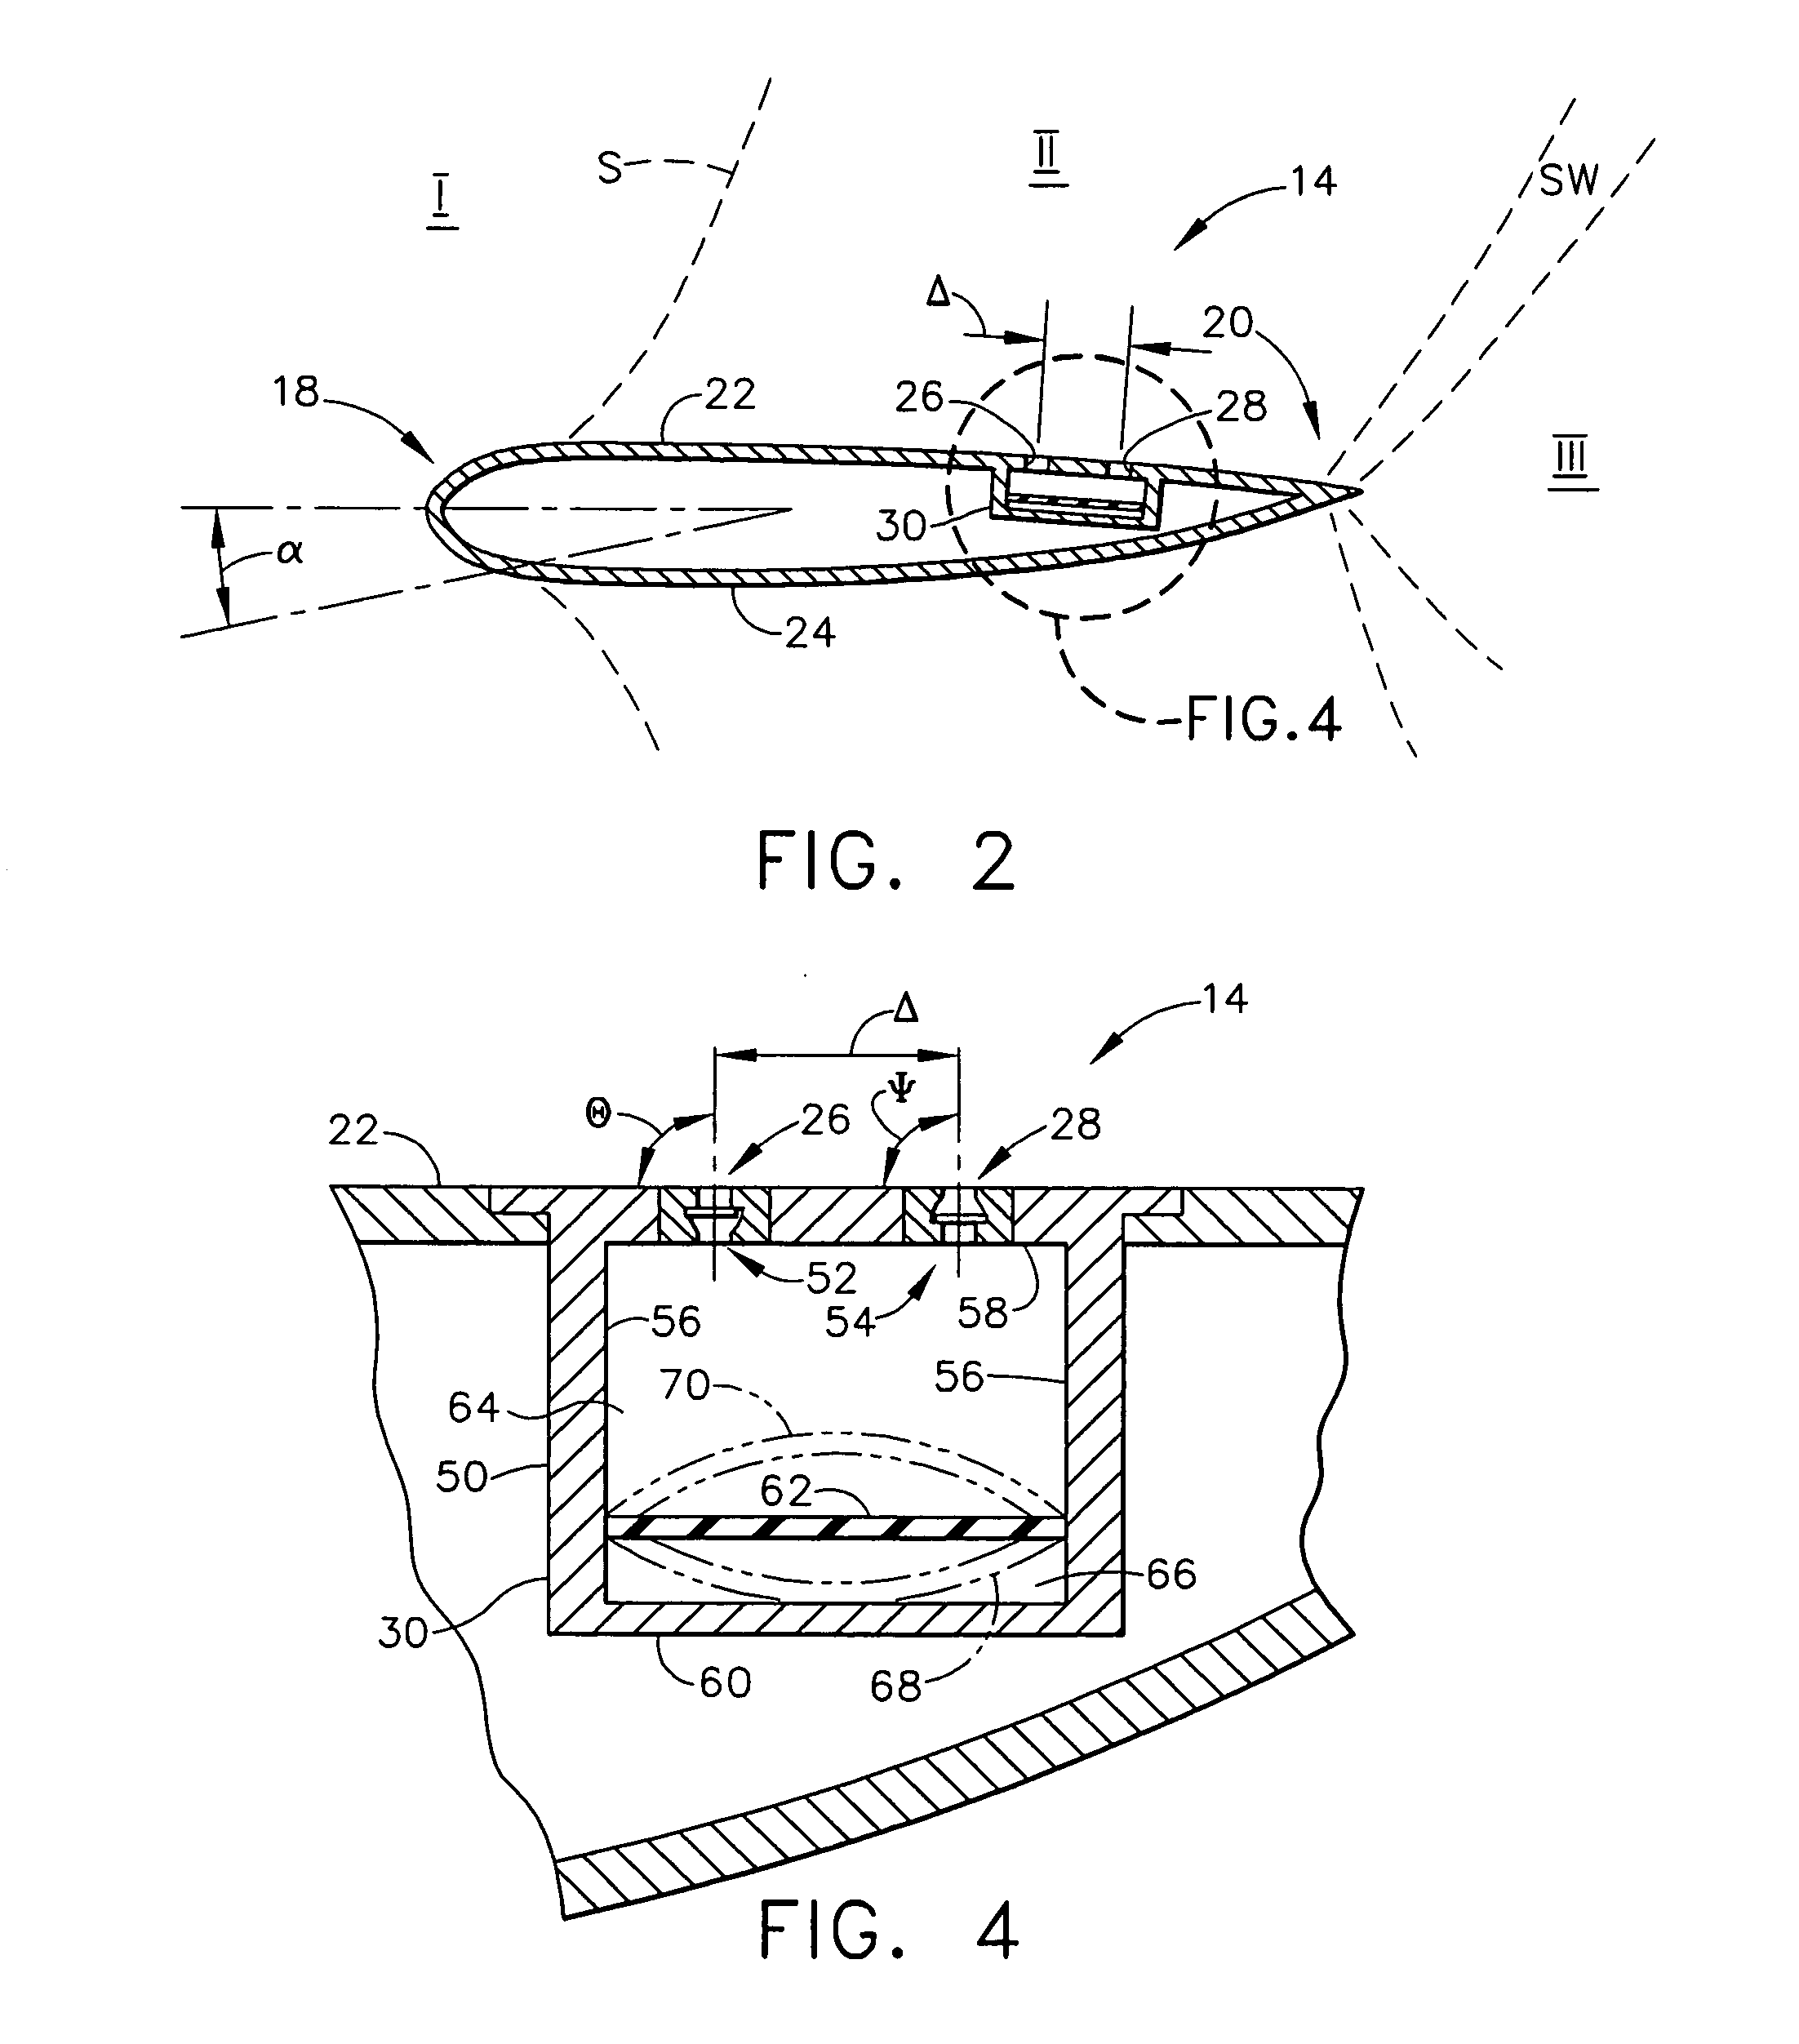 Dual point active flow control system for controlling air vehicle attitude during transonic flight